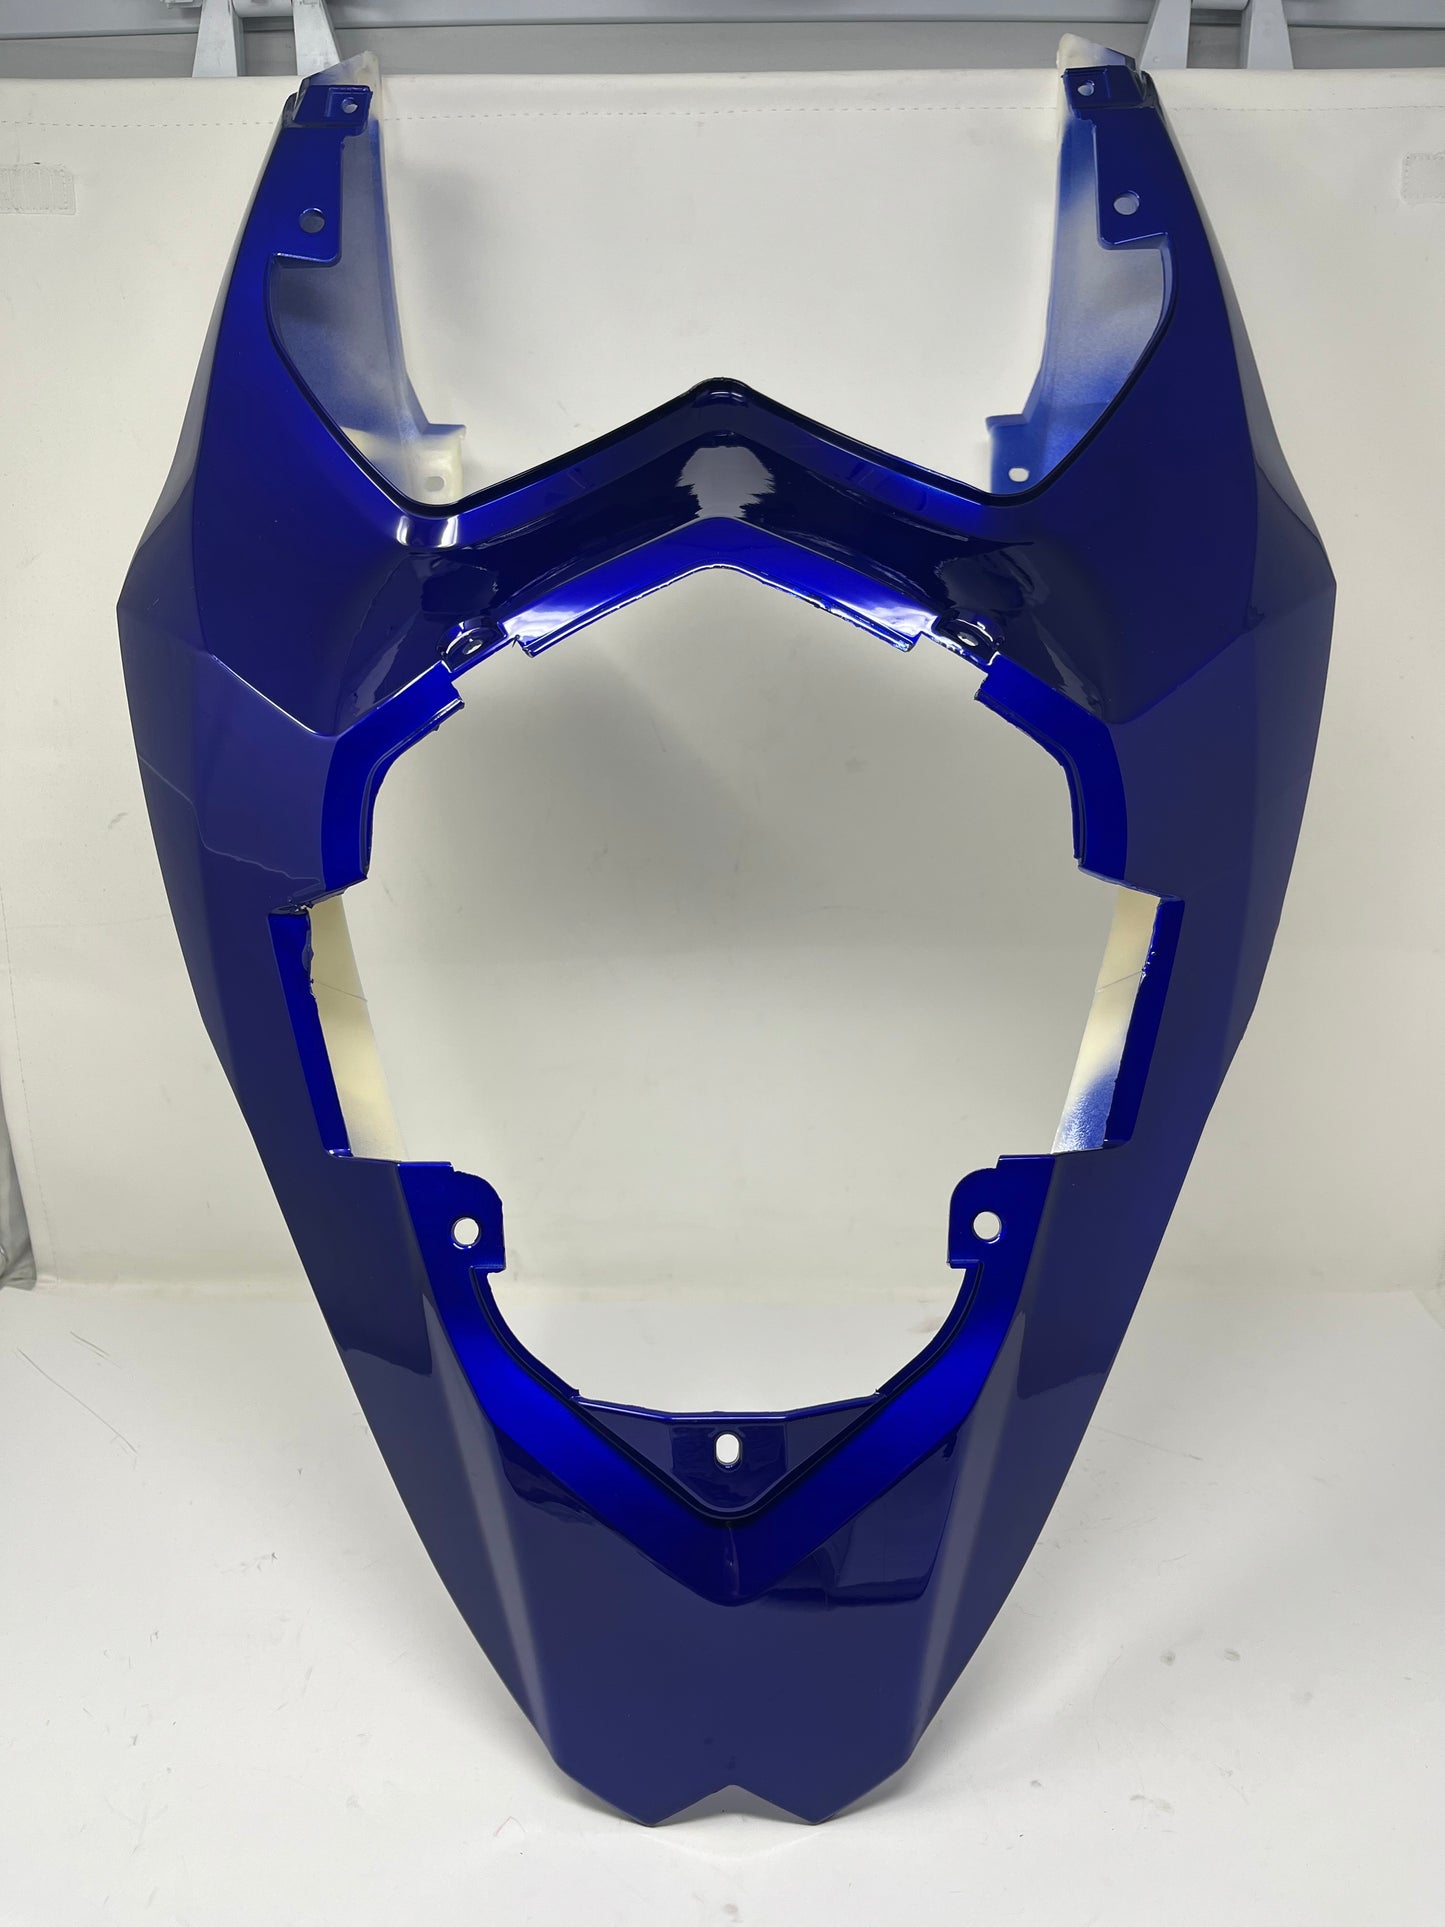 DF250RTS Tail fairing for X22r motorcycle. 